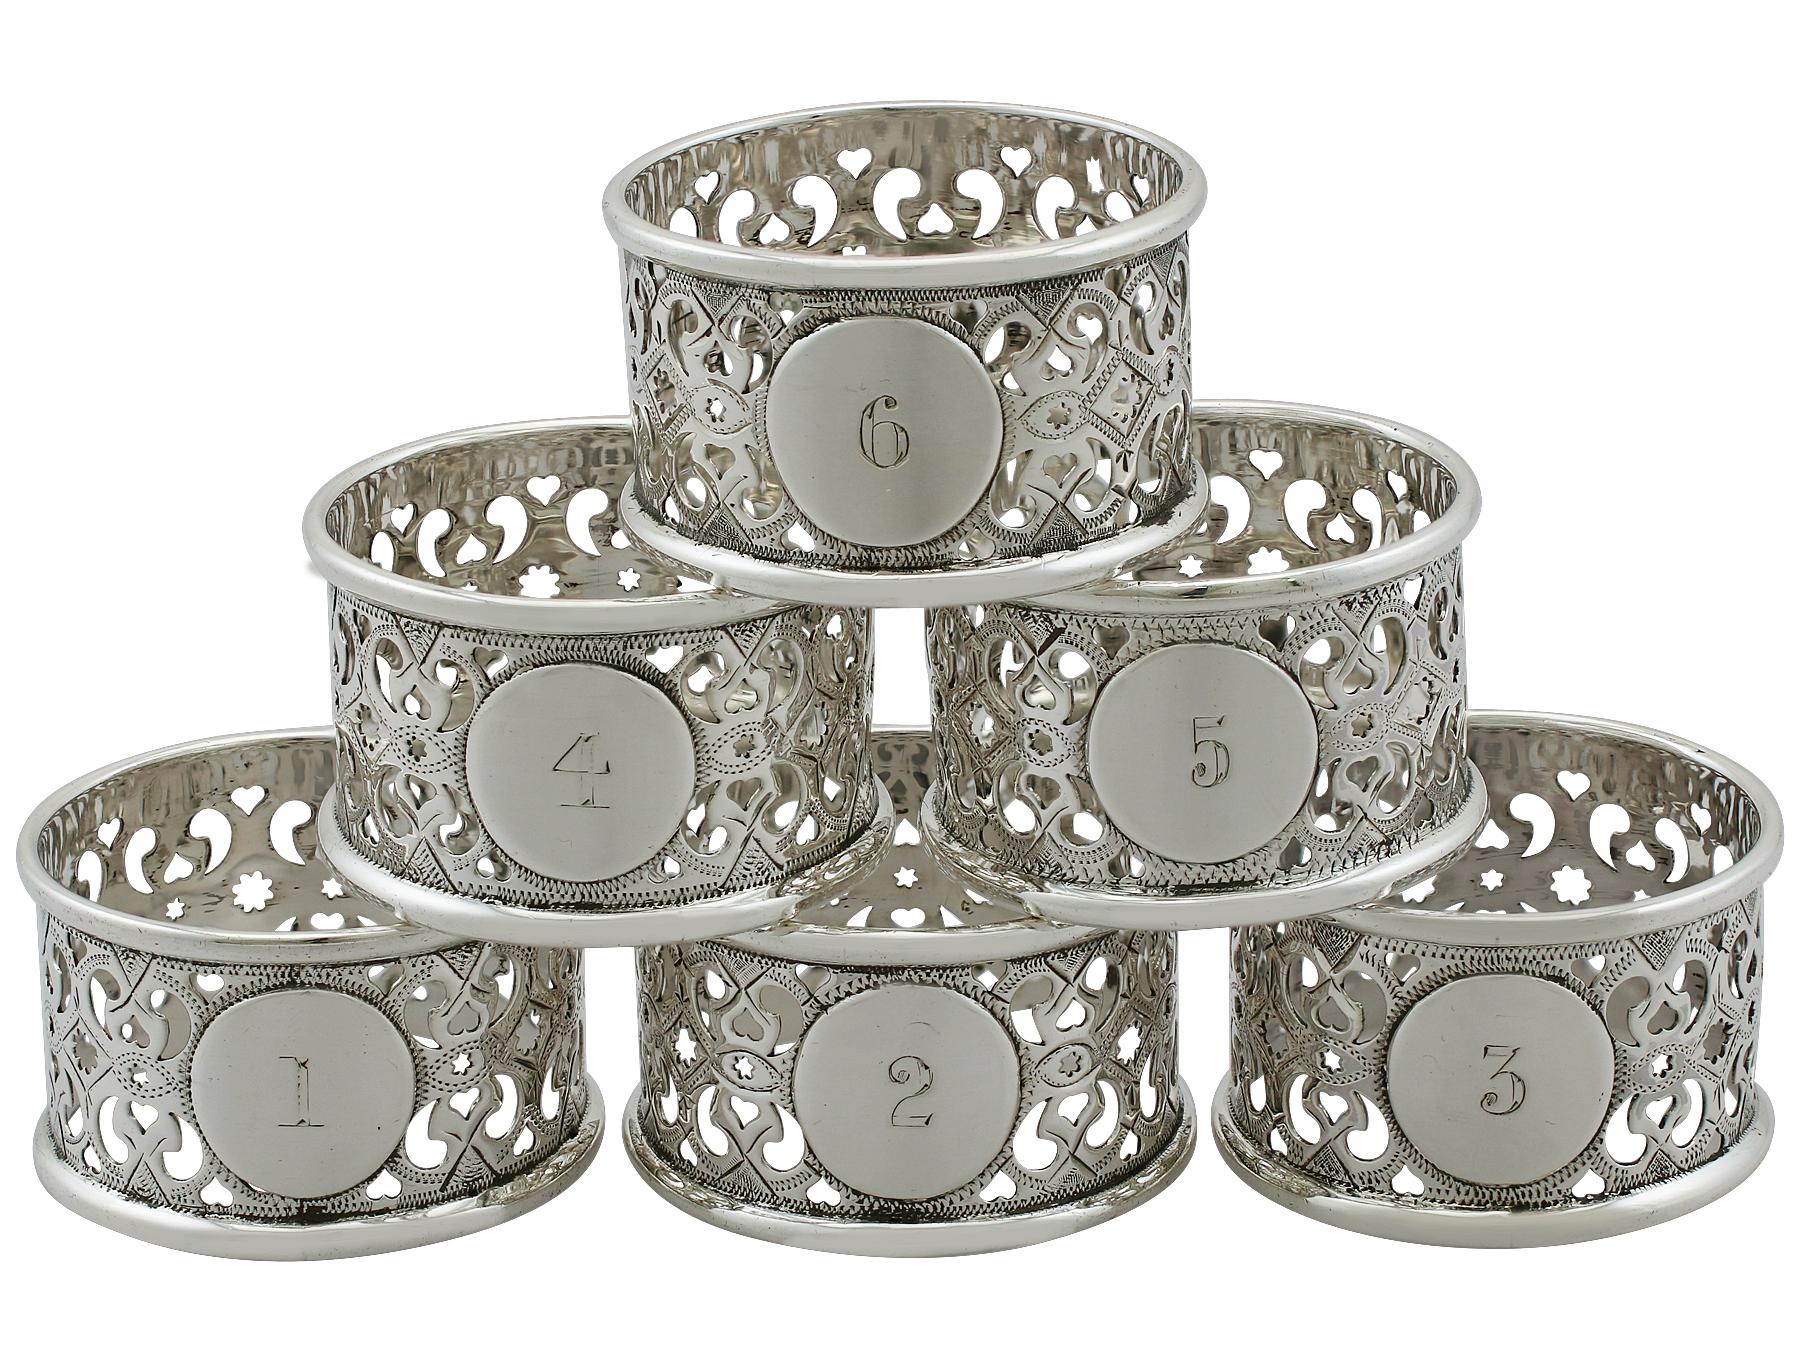 An exceptional, fine and impressive set of six numbered antique Victorian English sterling silver napkin rings, boxed, an addition to our dining silverware collection.

This exceptional set of antique Victorian napkin rings in sterling silver